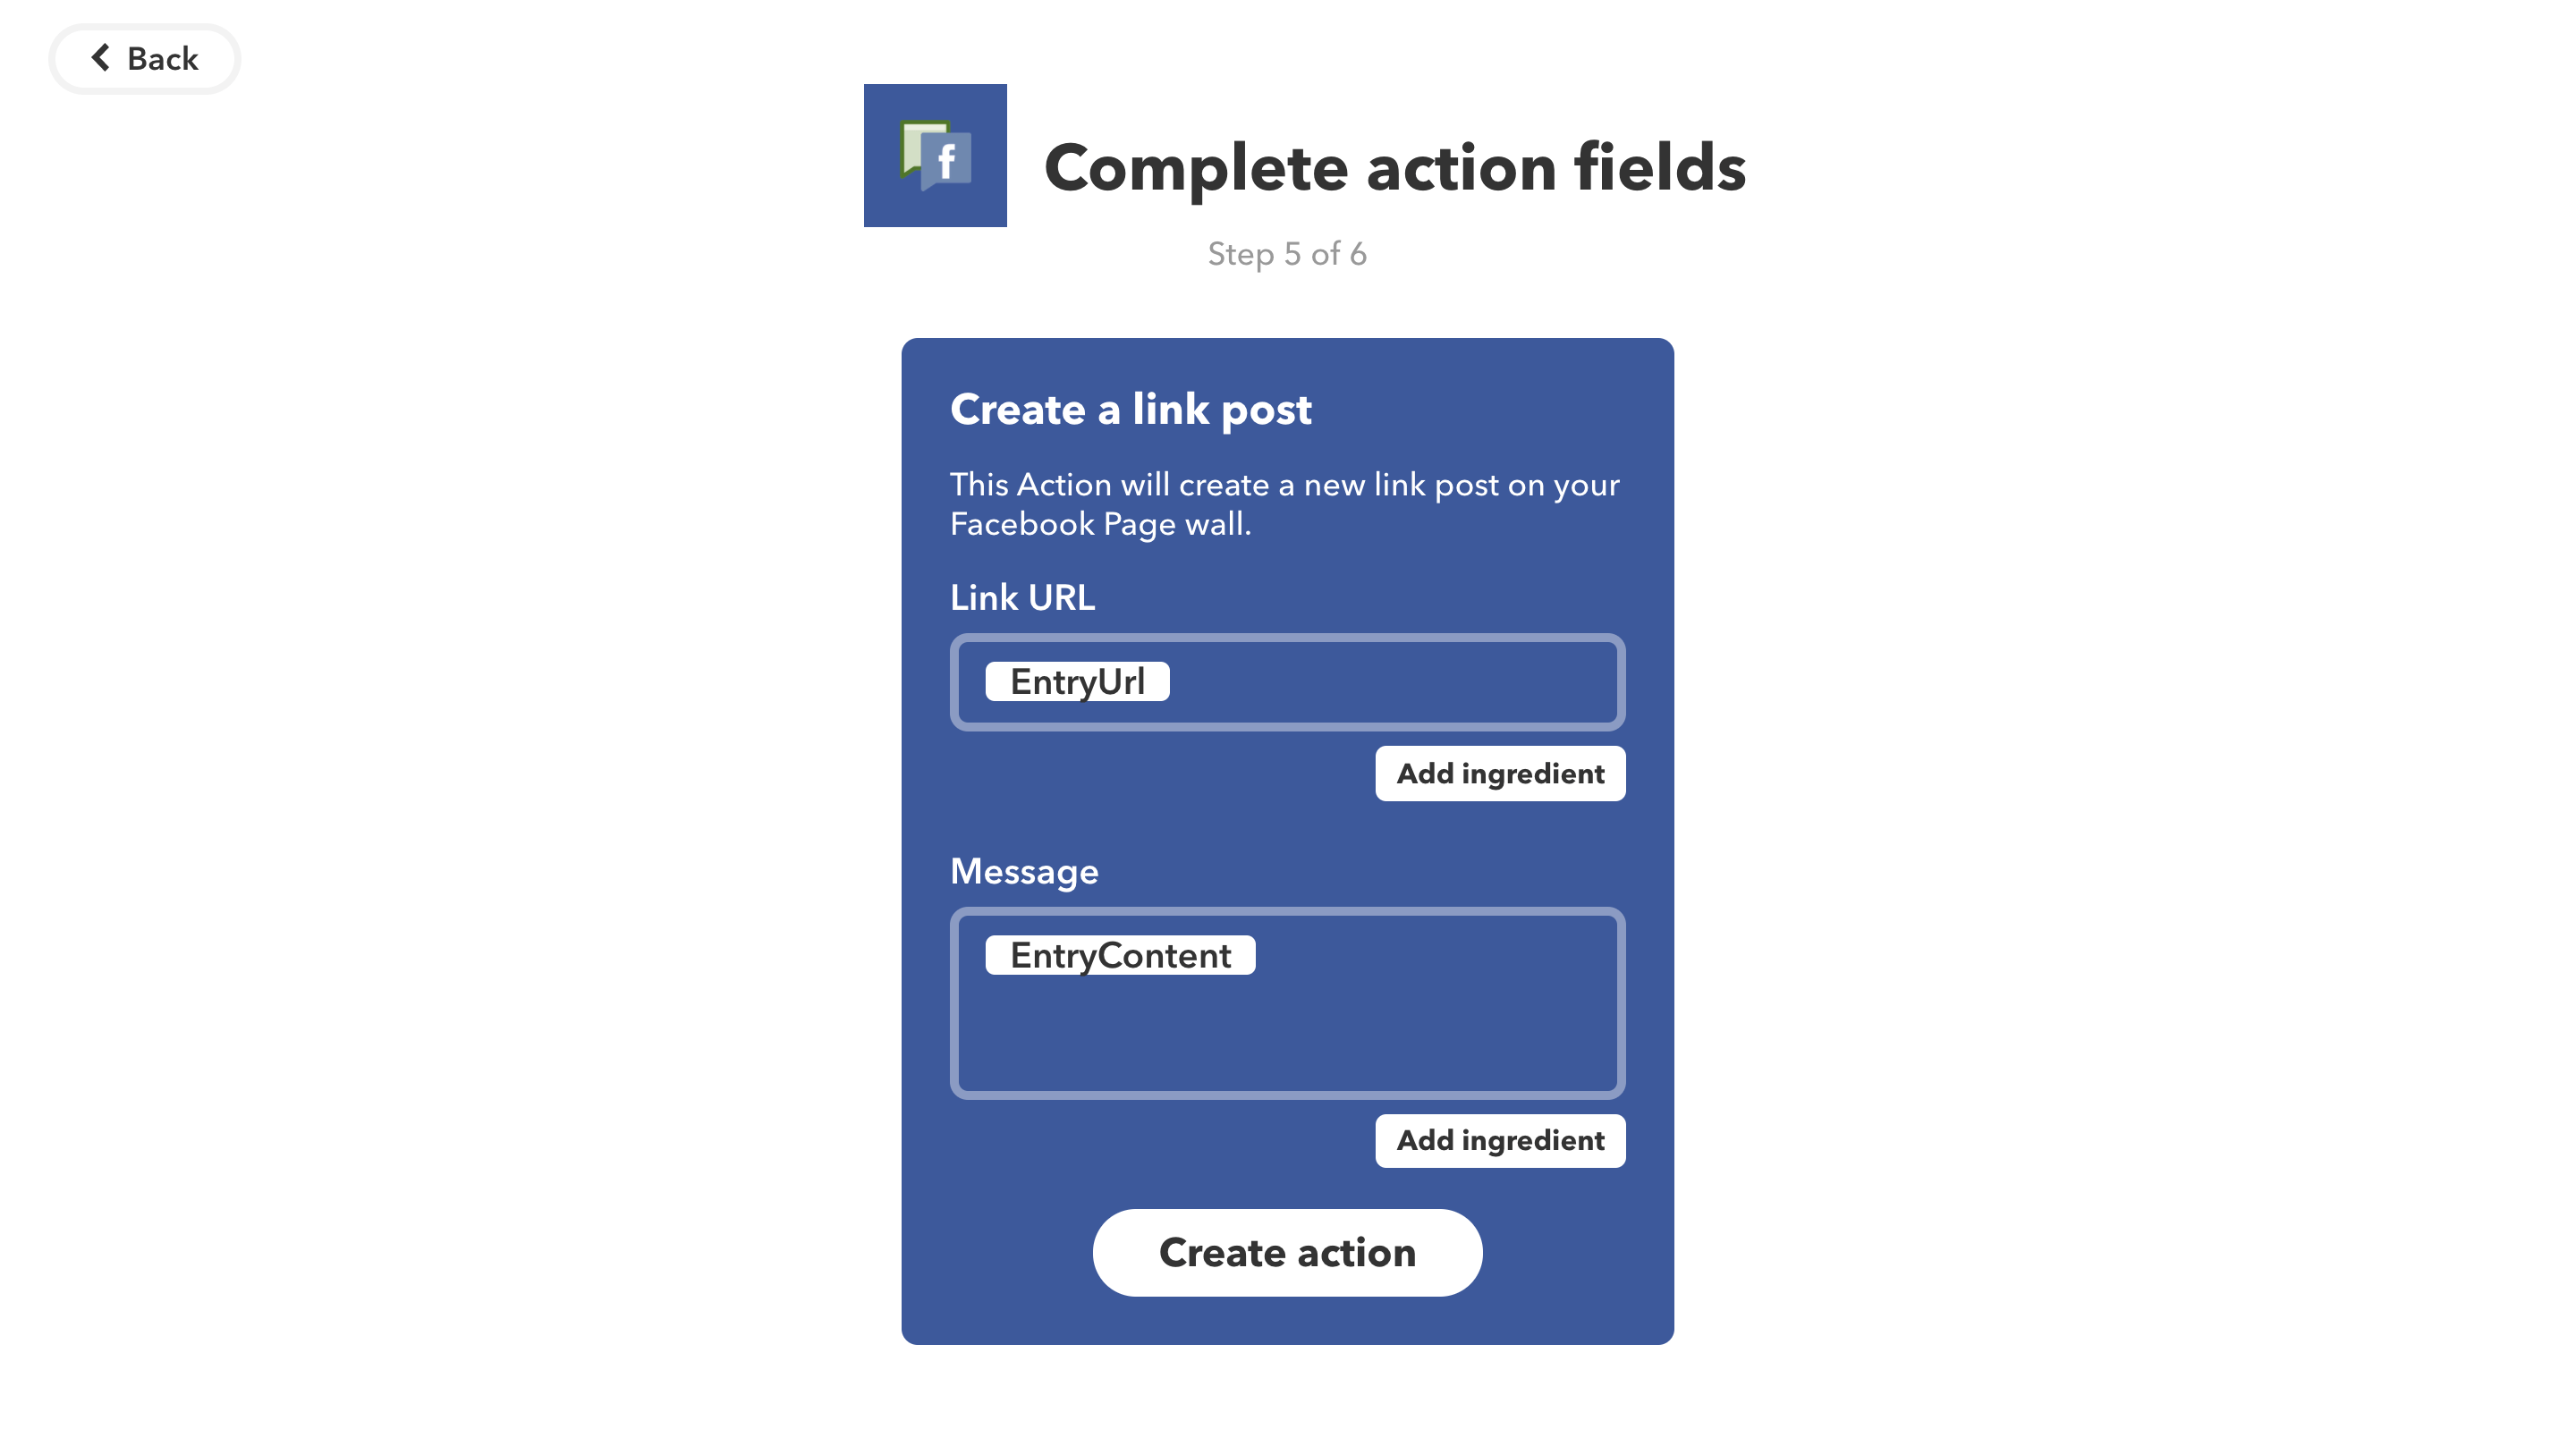 Complete action fields